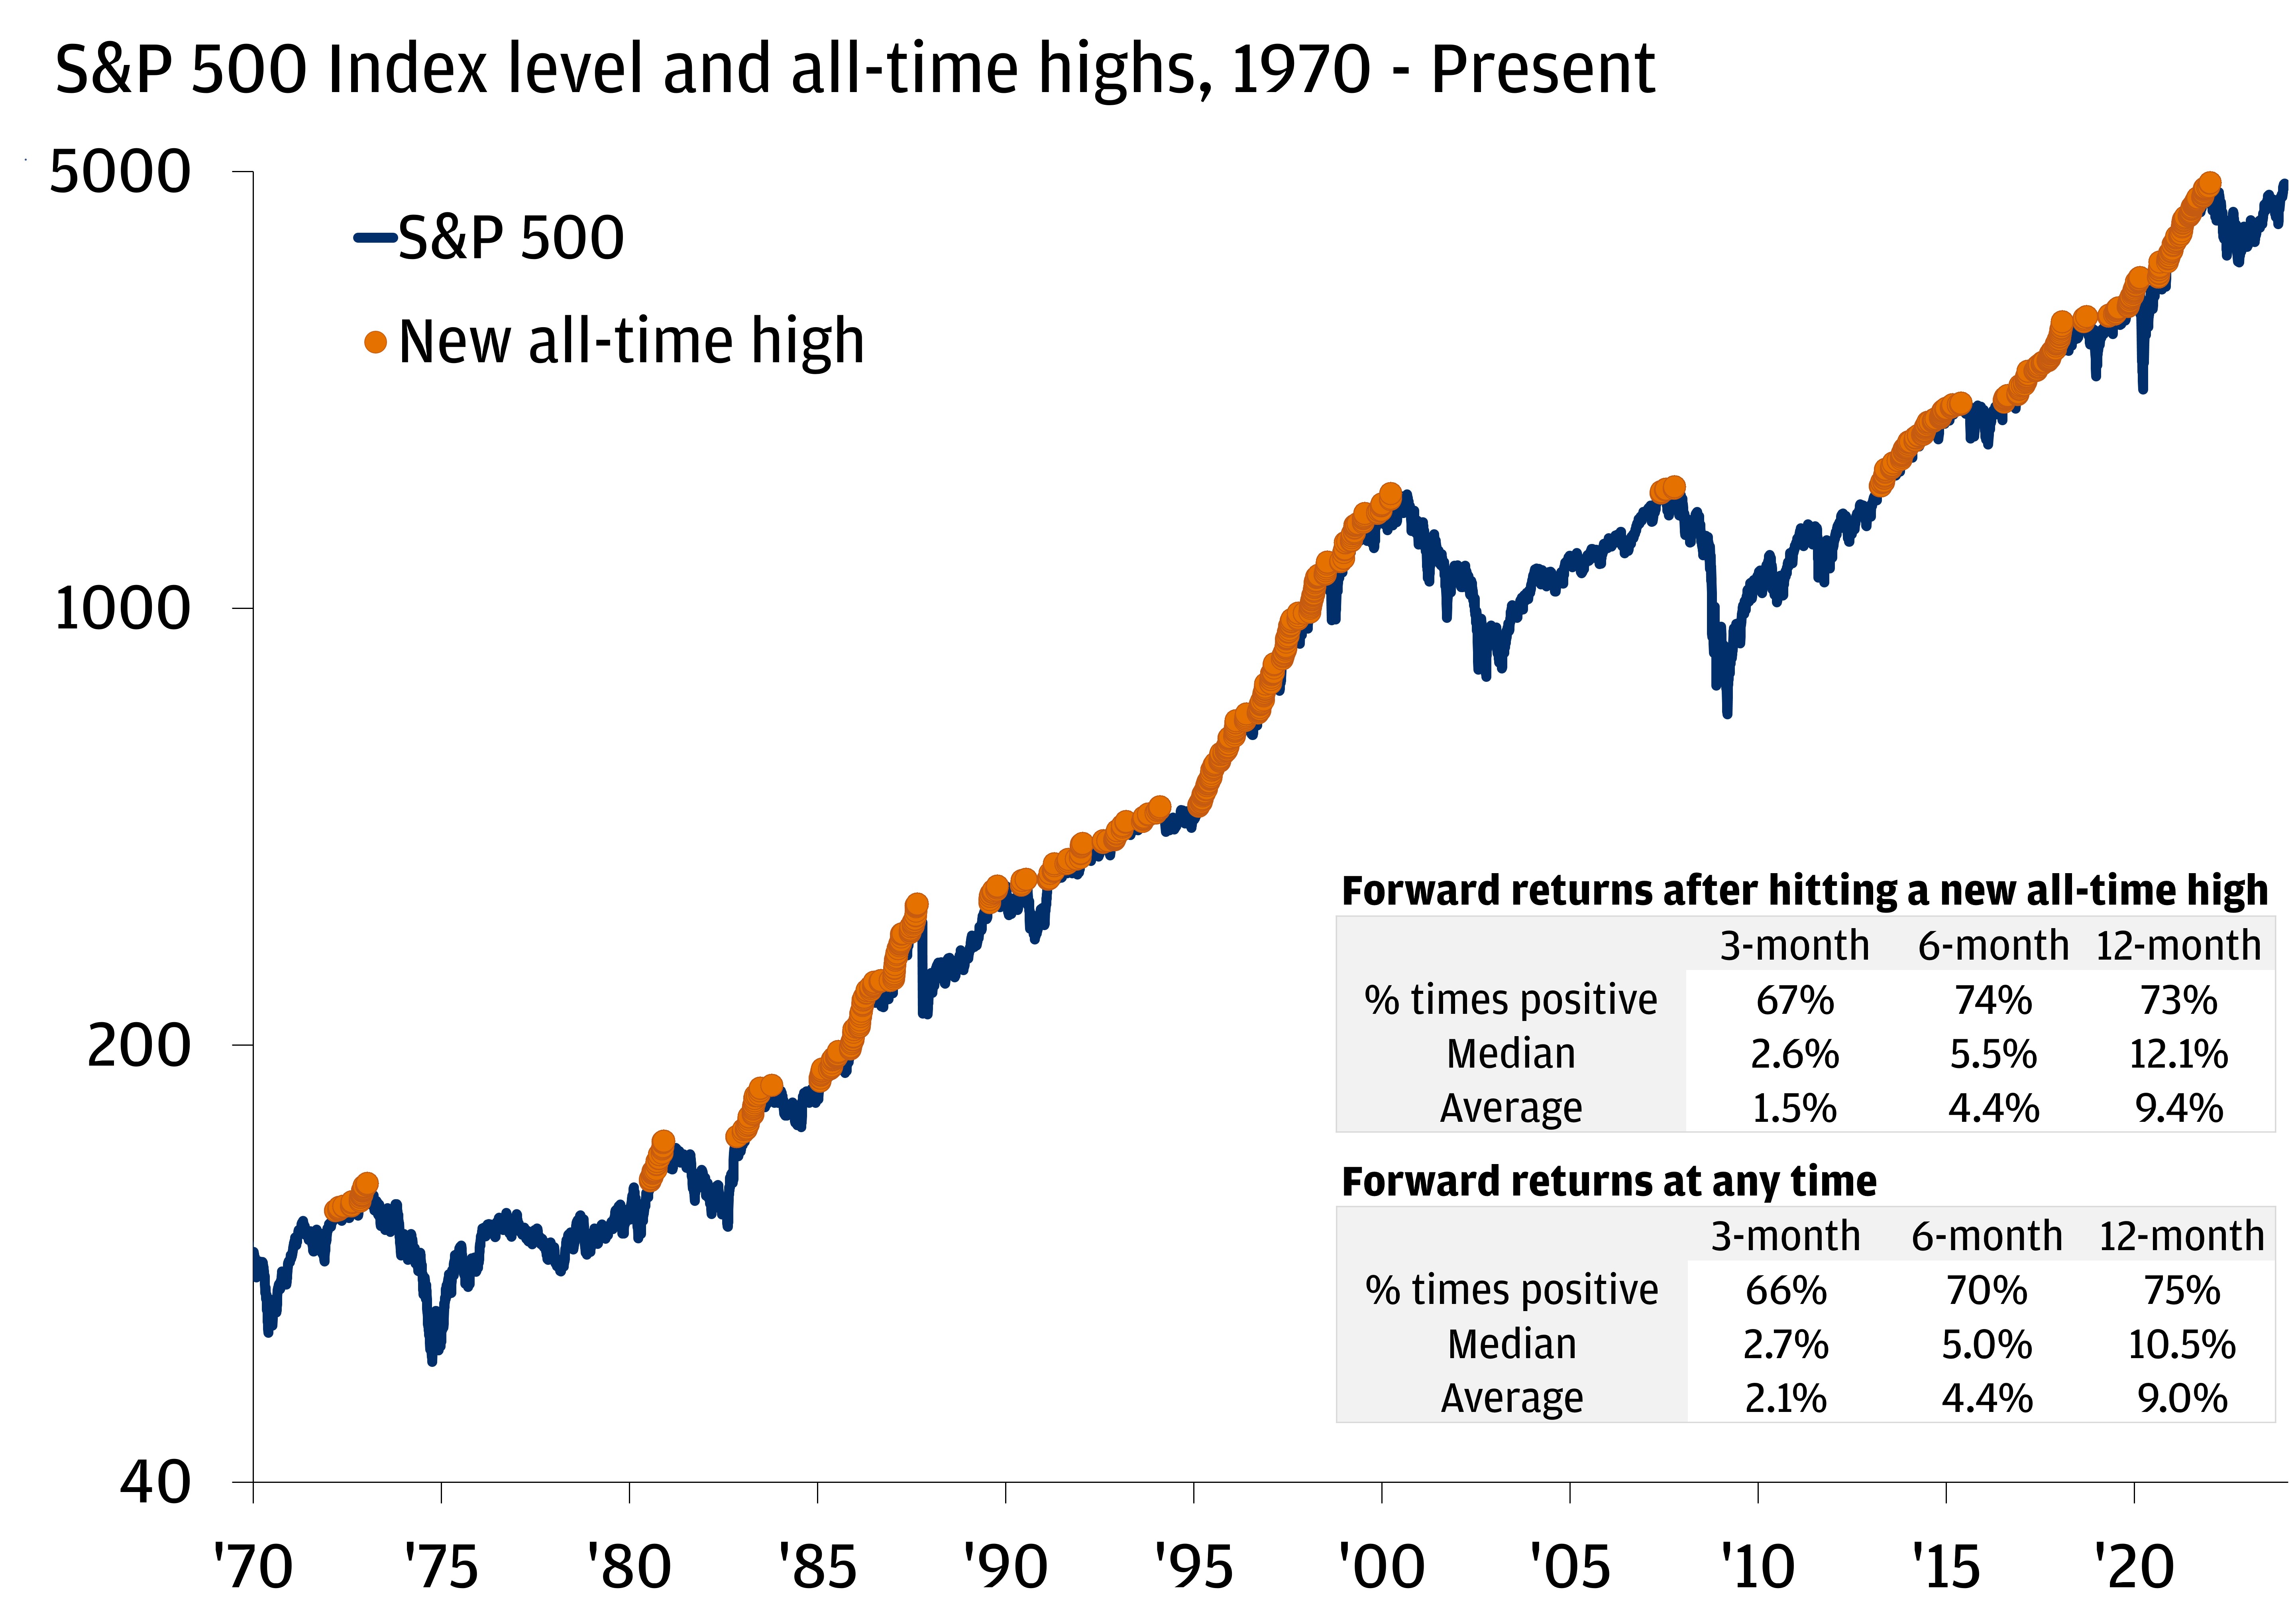 The chart describes the S&P 500 Index level and all-time highs.